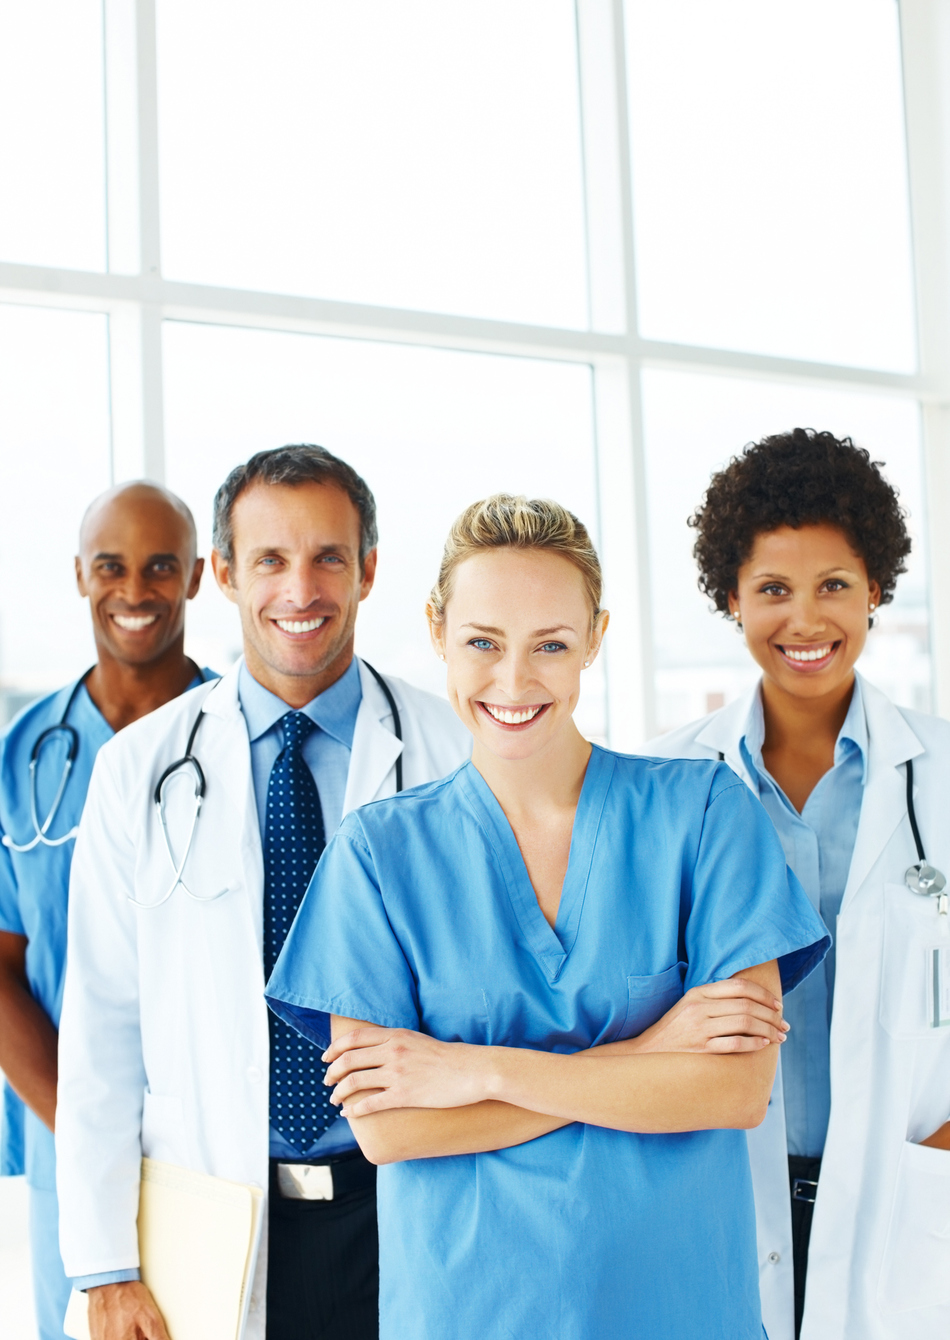 The Future Role of Physician Assistants